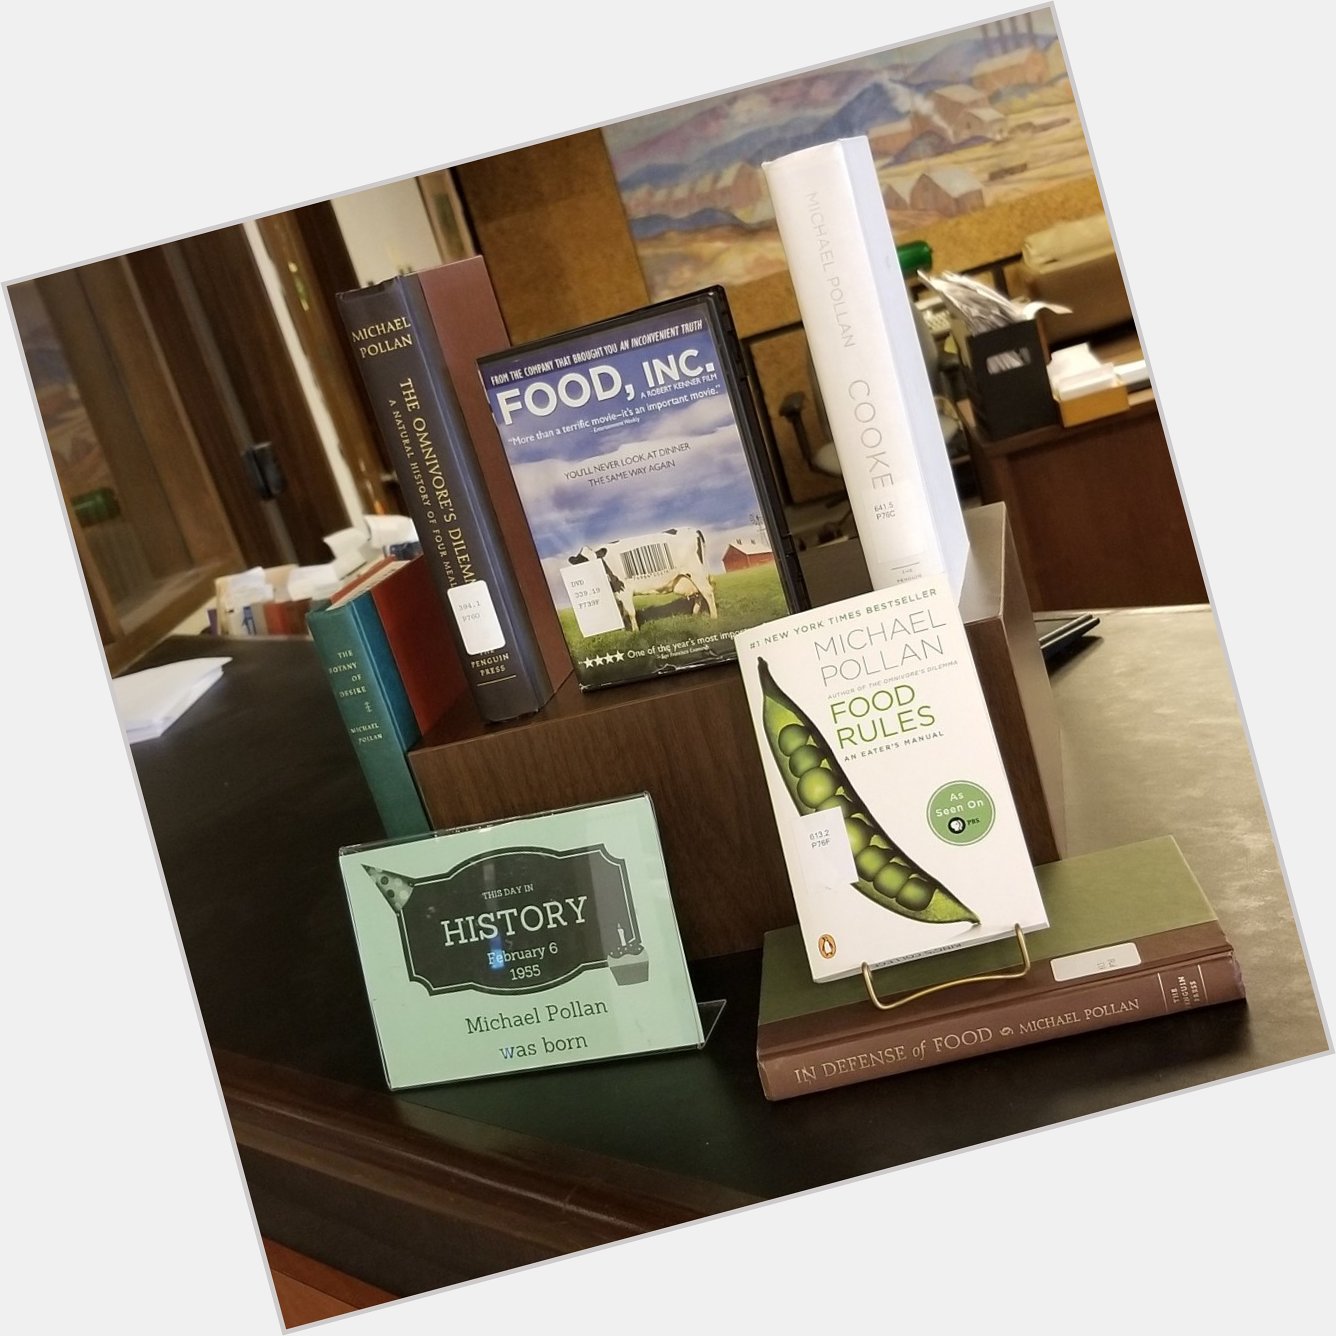 Happy Birthday, Michael Pollan! Come check out the pop up display on the Circulation Desk for some of his books 